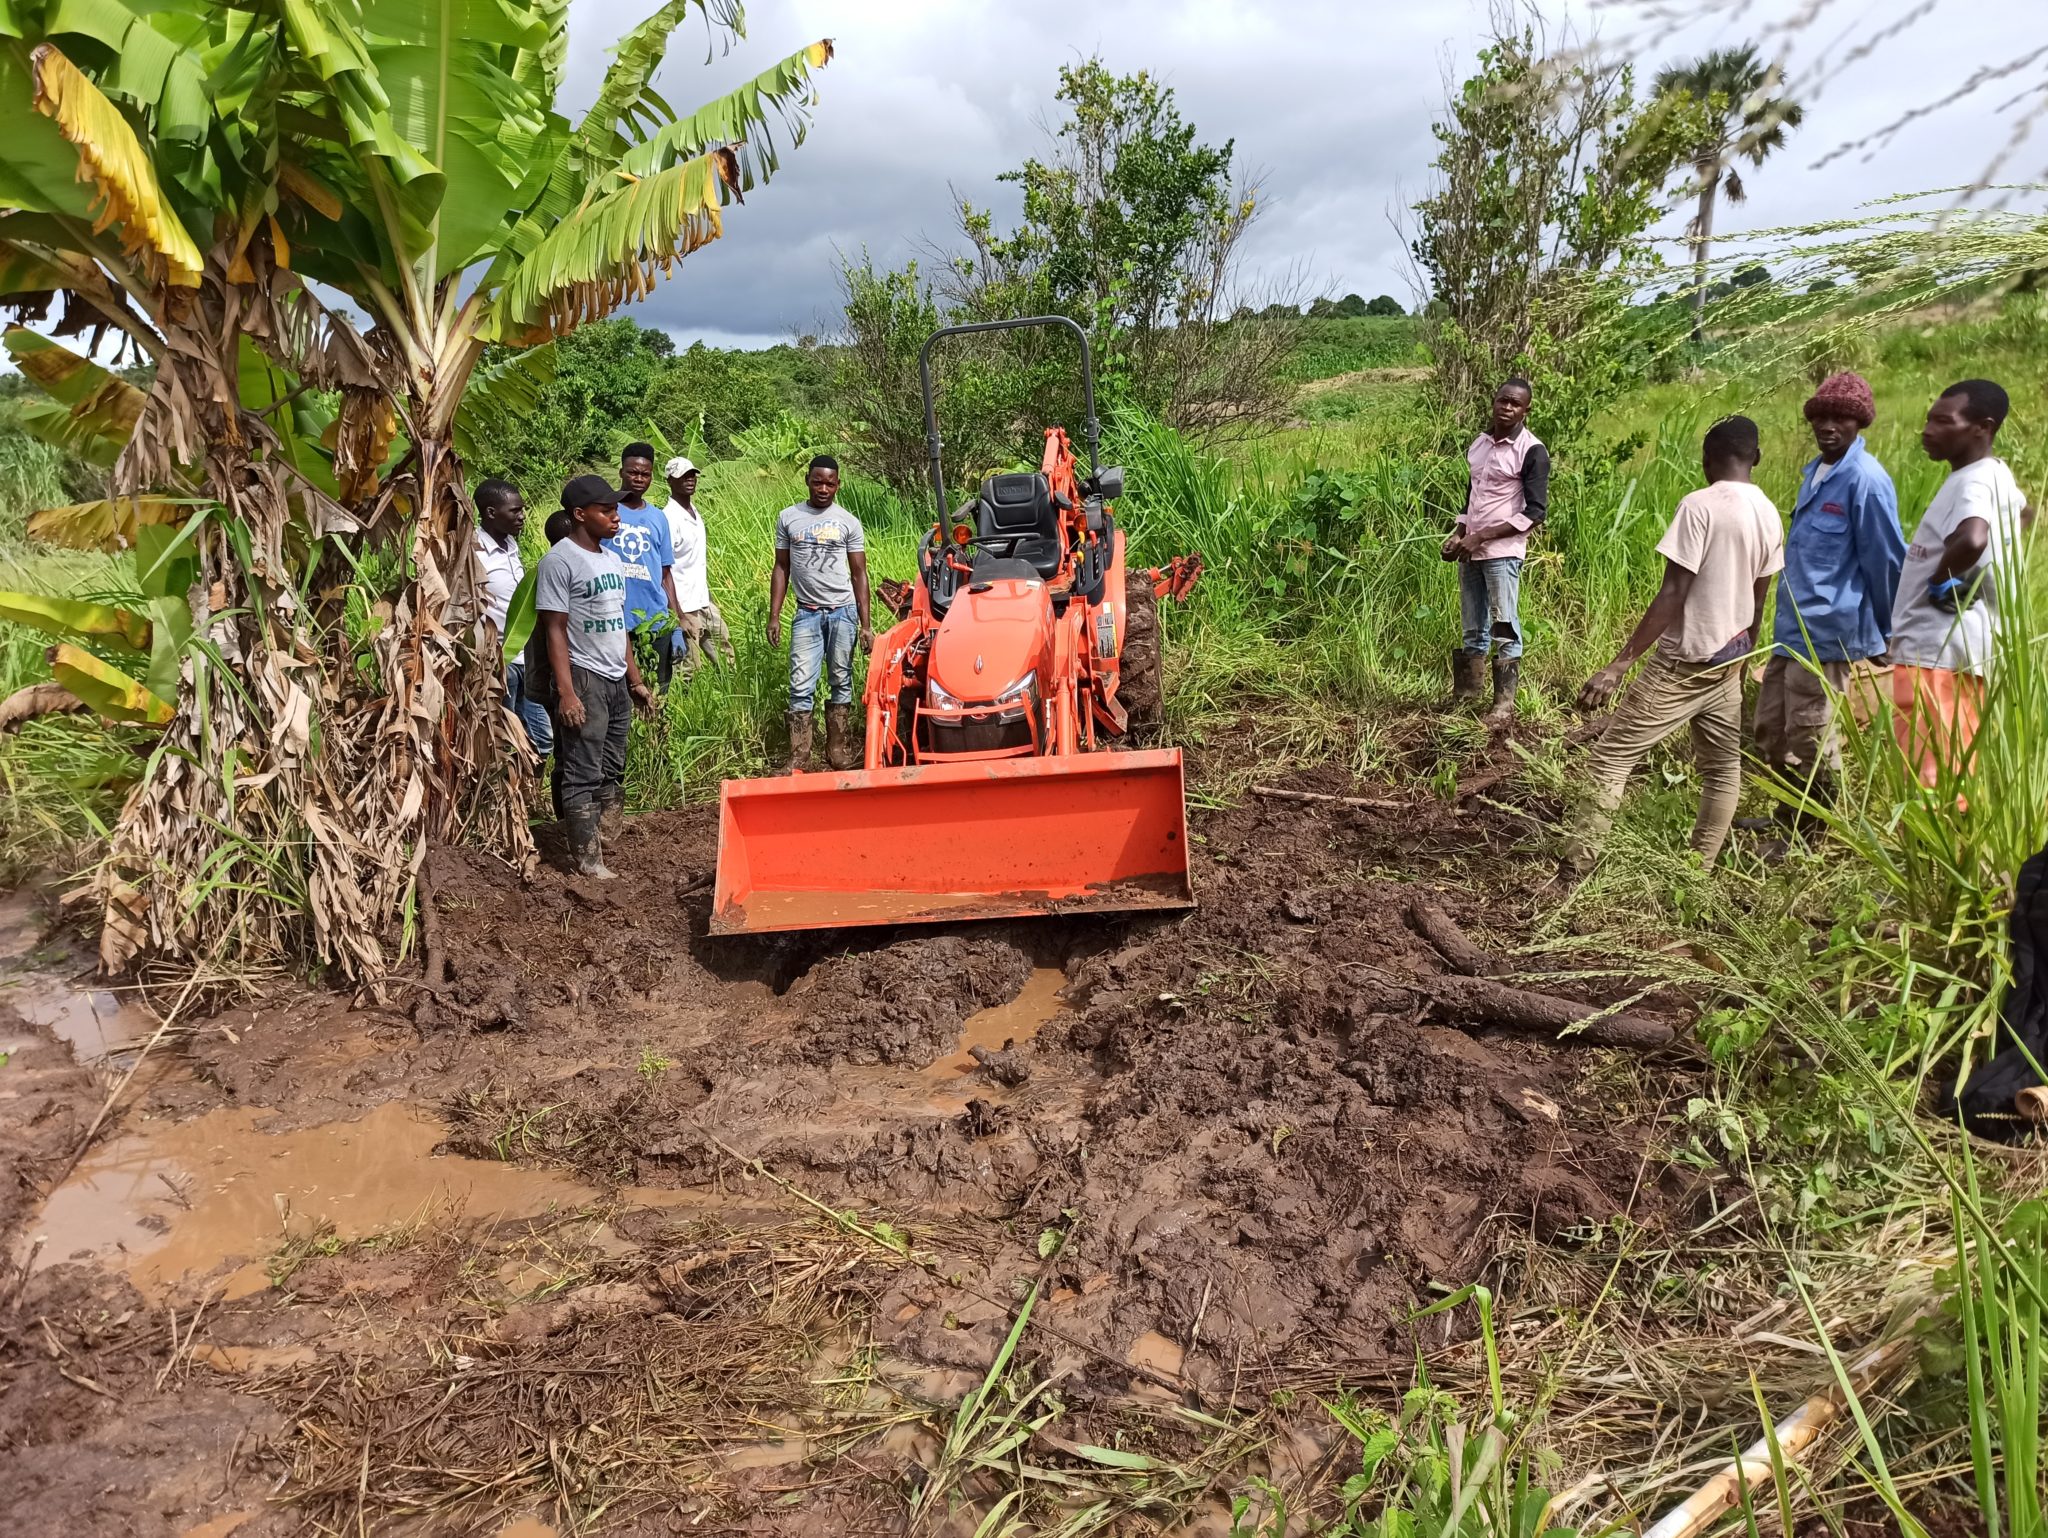 A handful of Mozambican farmers evaluate an orange tractor stuck in the mud